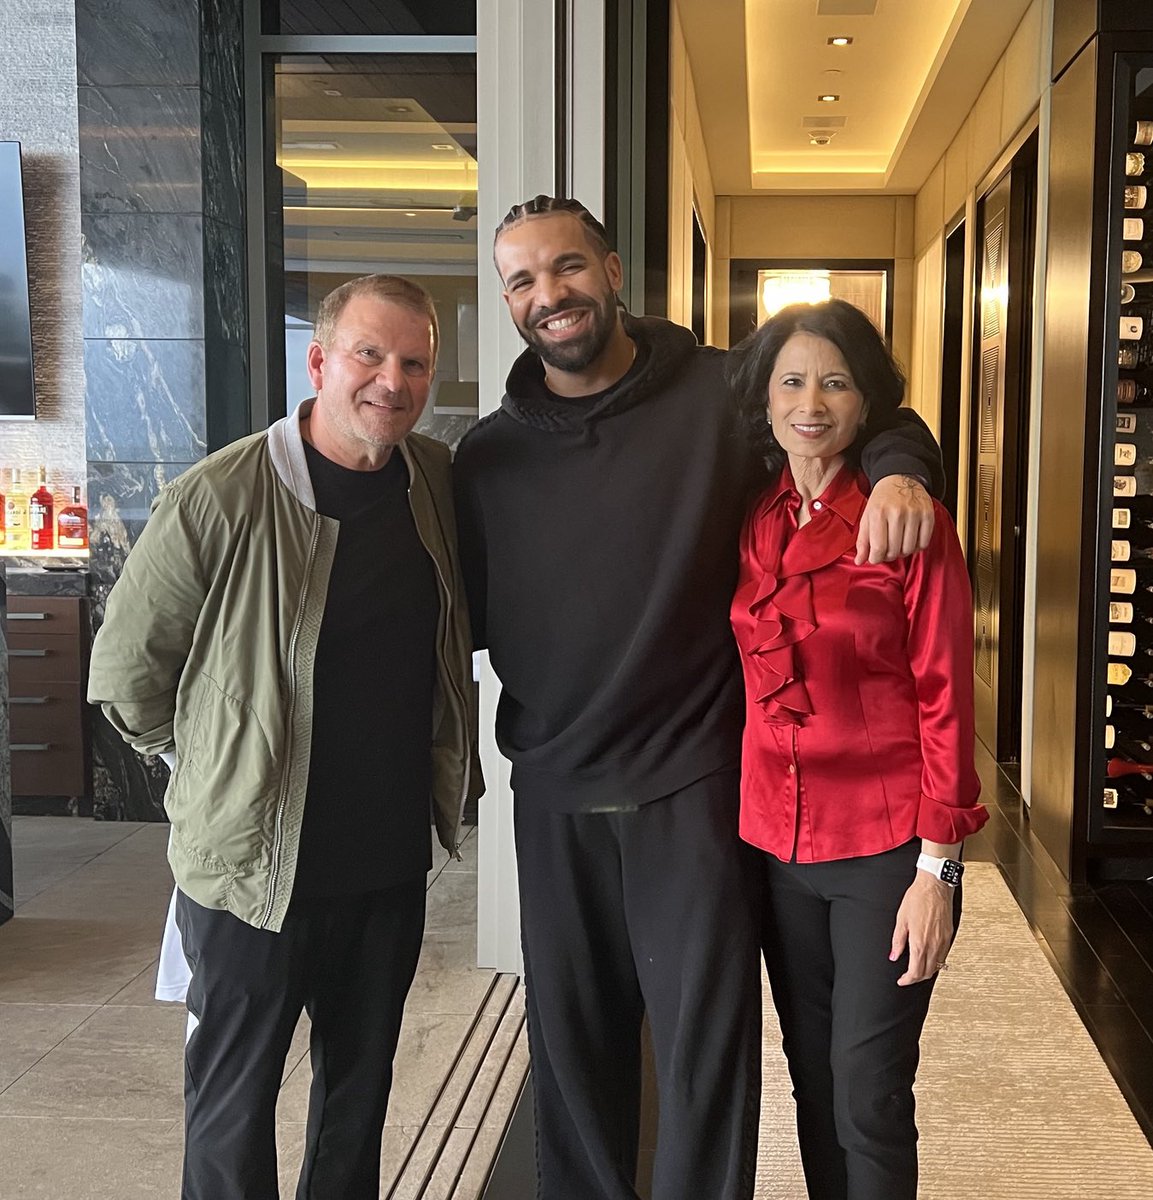 Enjoyed meeting the one and only Drake! With Chairman ⁦⁦@TilmanJFertitta⁩